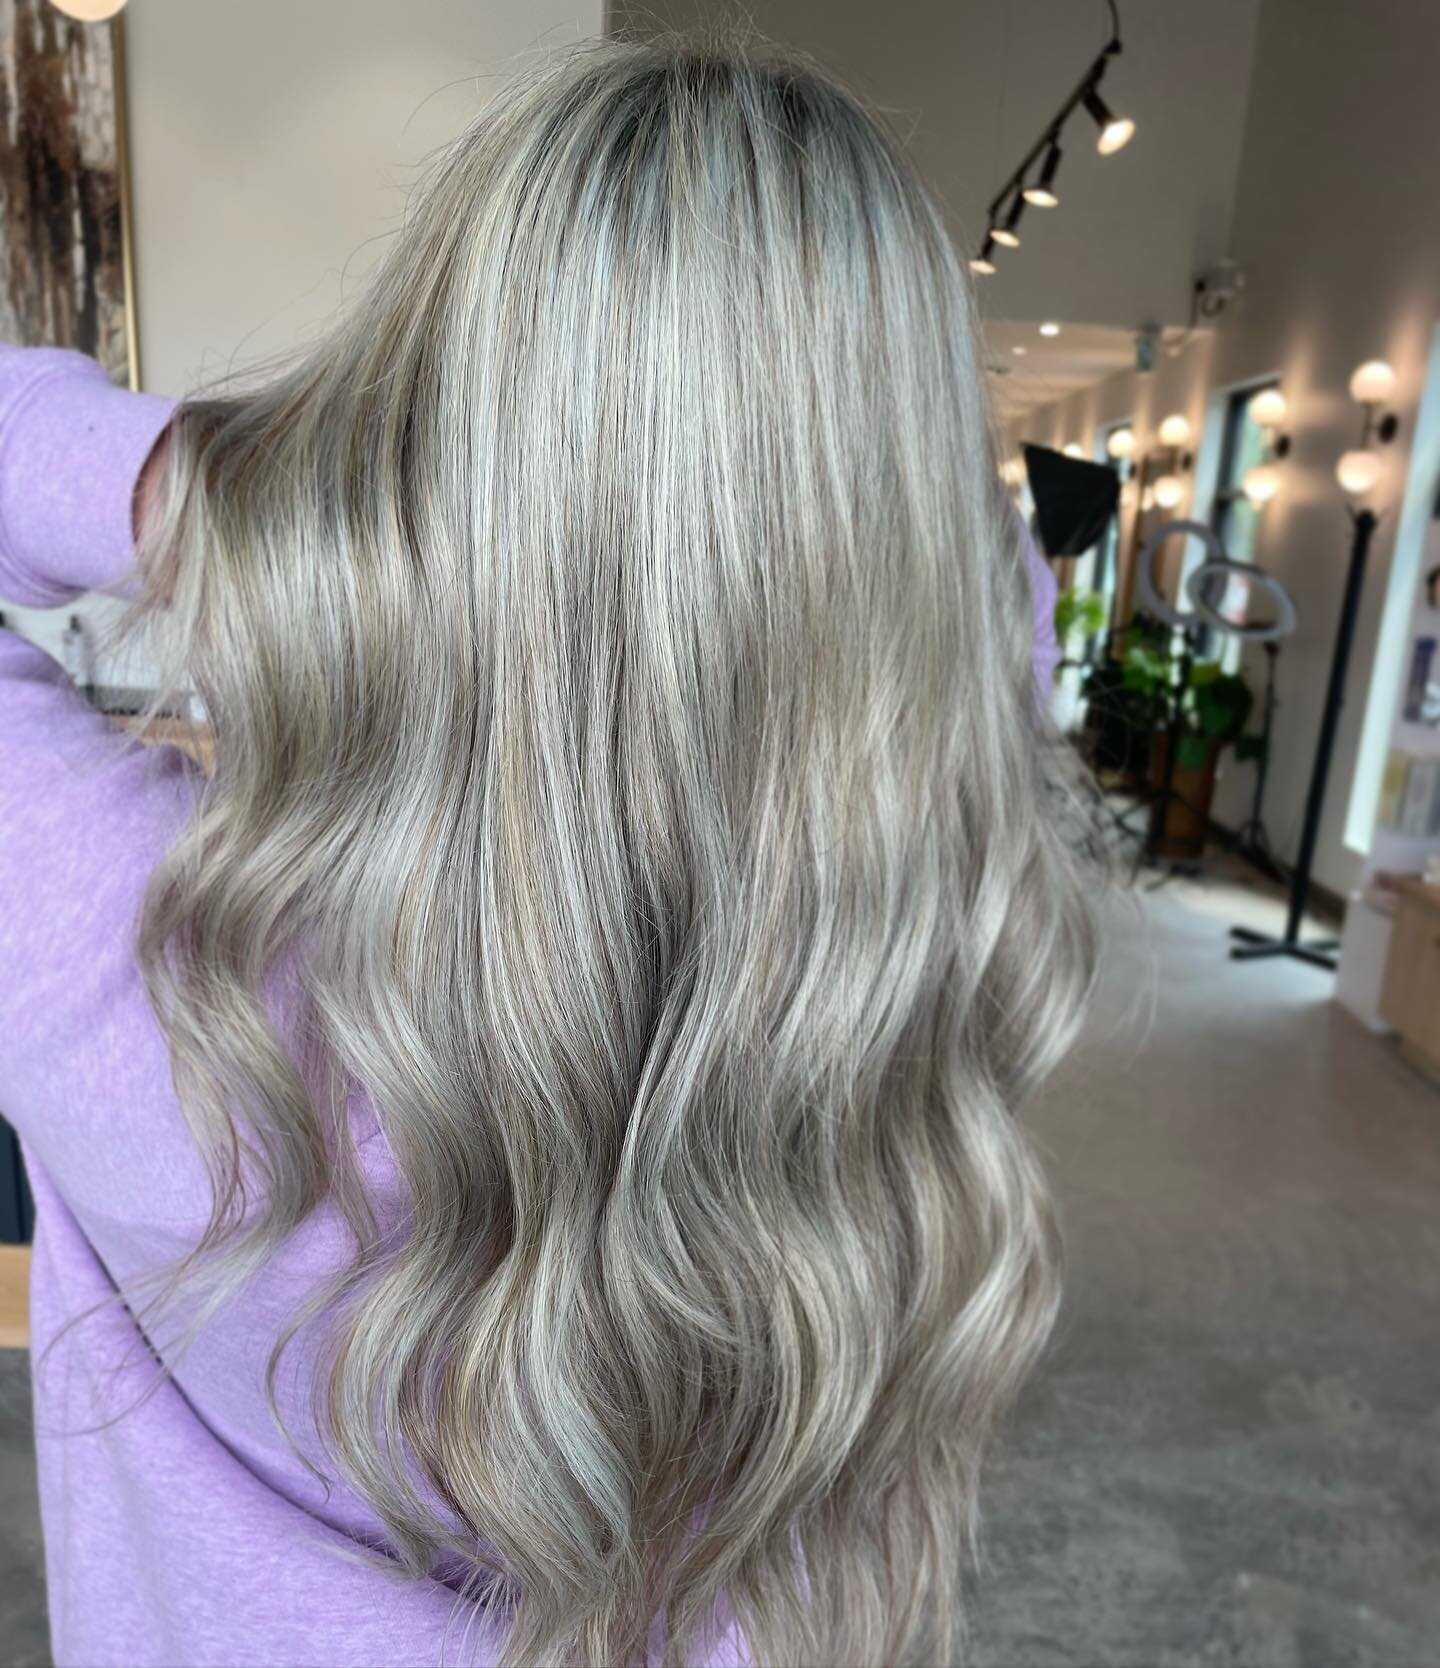 Natural level 3 dark brown. Lightened with @joicocanada blonde life and toned with joico blonde life gloss ash/violet. 

Created by @chelsey.passionsbeautystudio